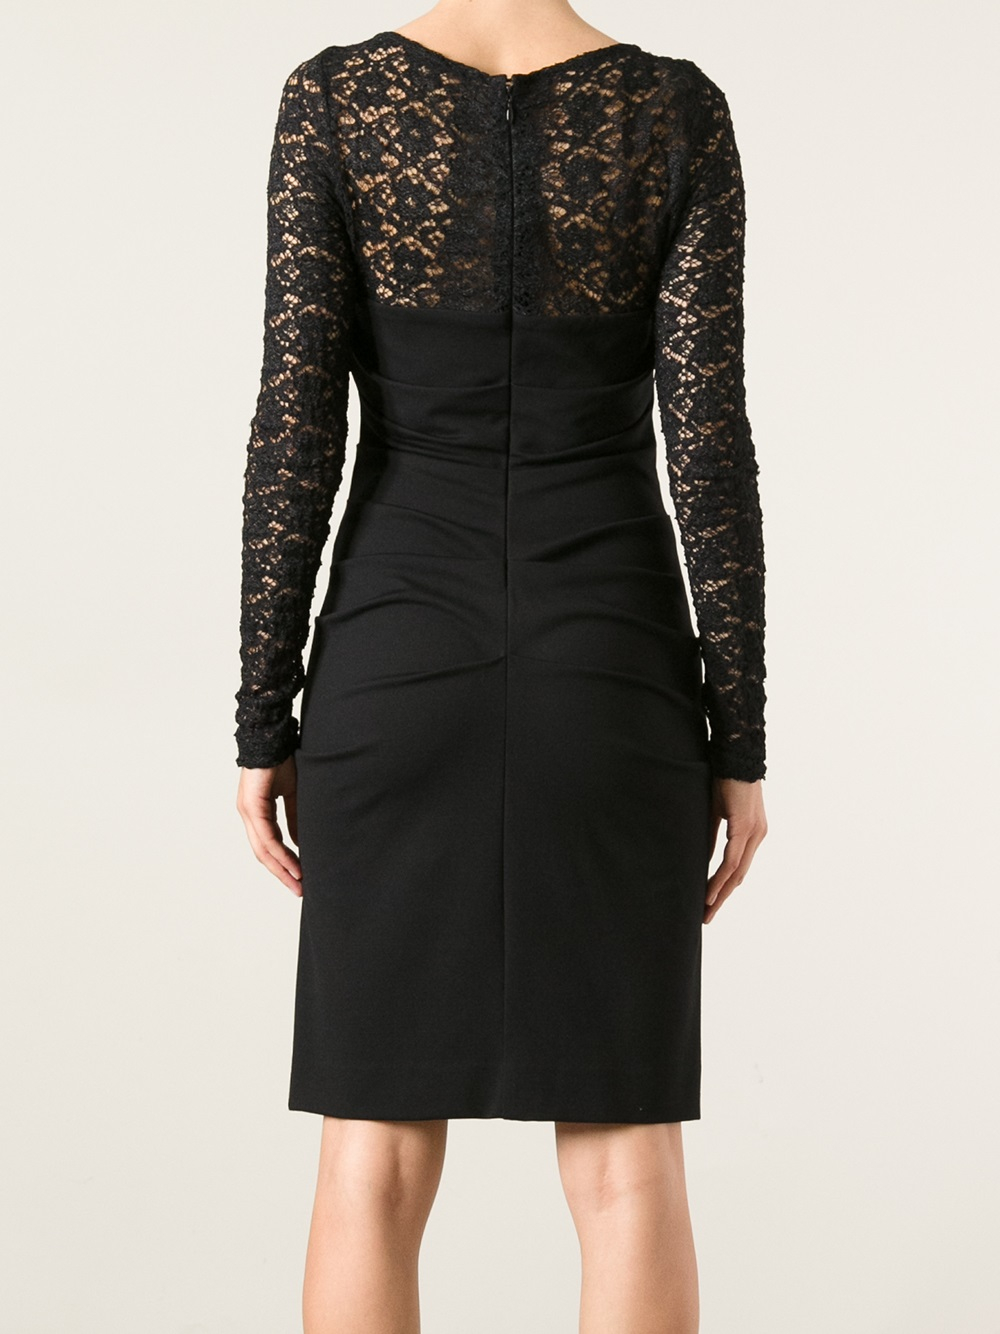 Nicole miller Lace Illusion Dress in Black | Lyst